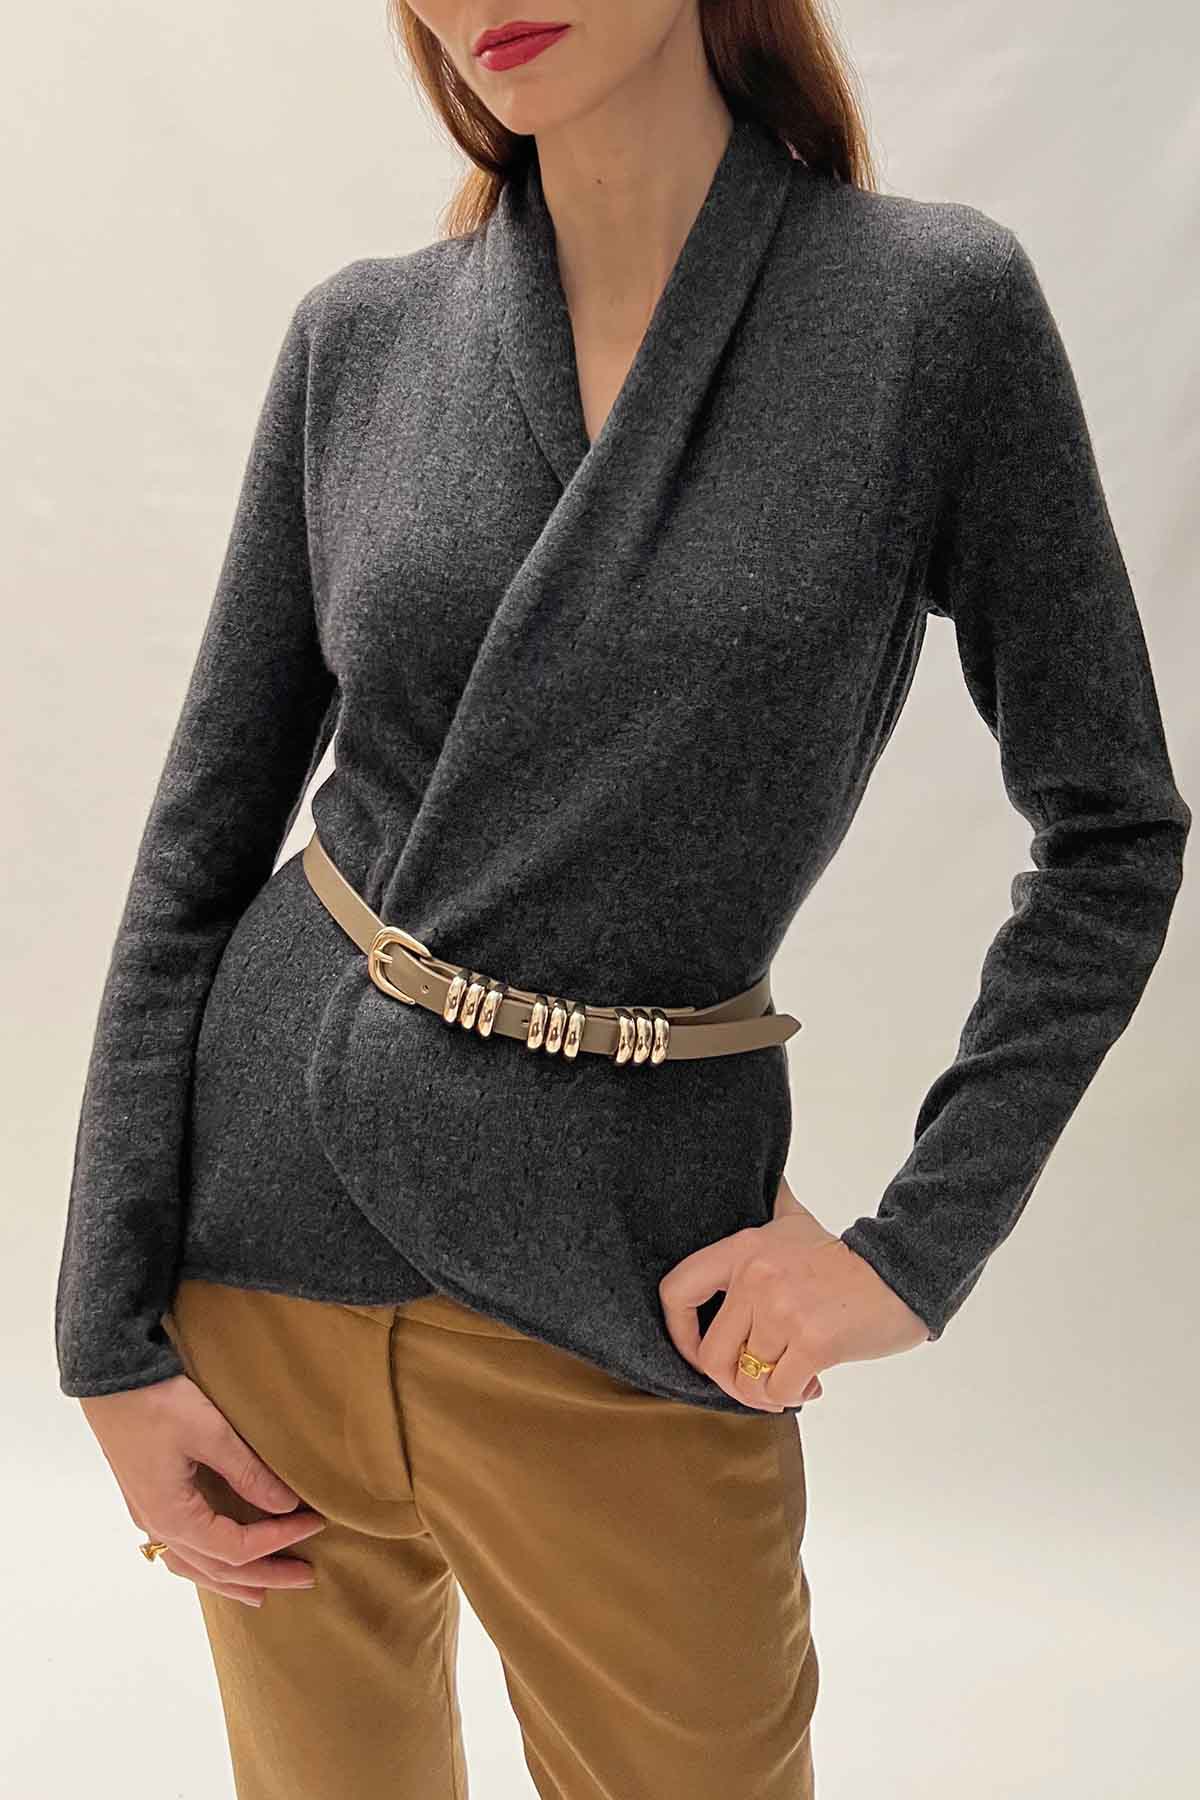 Charcoal grey Cashmere Cardigan - Lacy - SEMON Cashmere